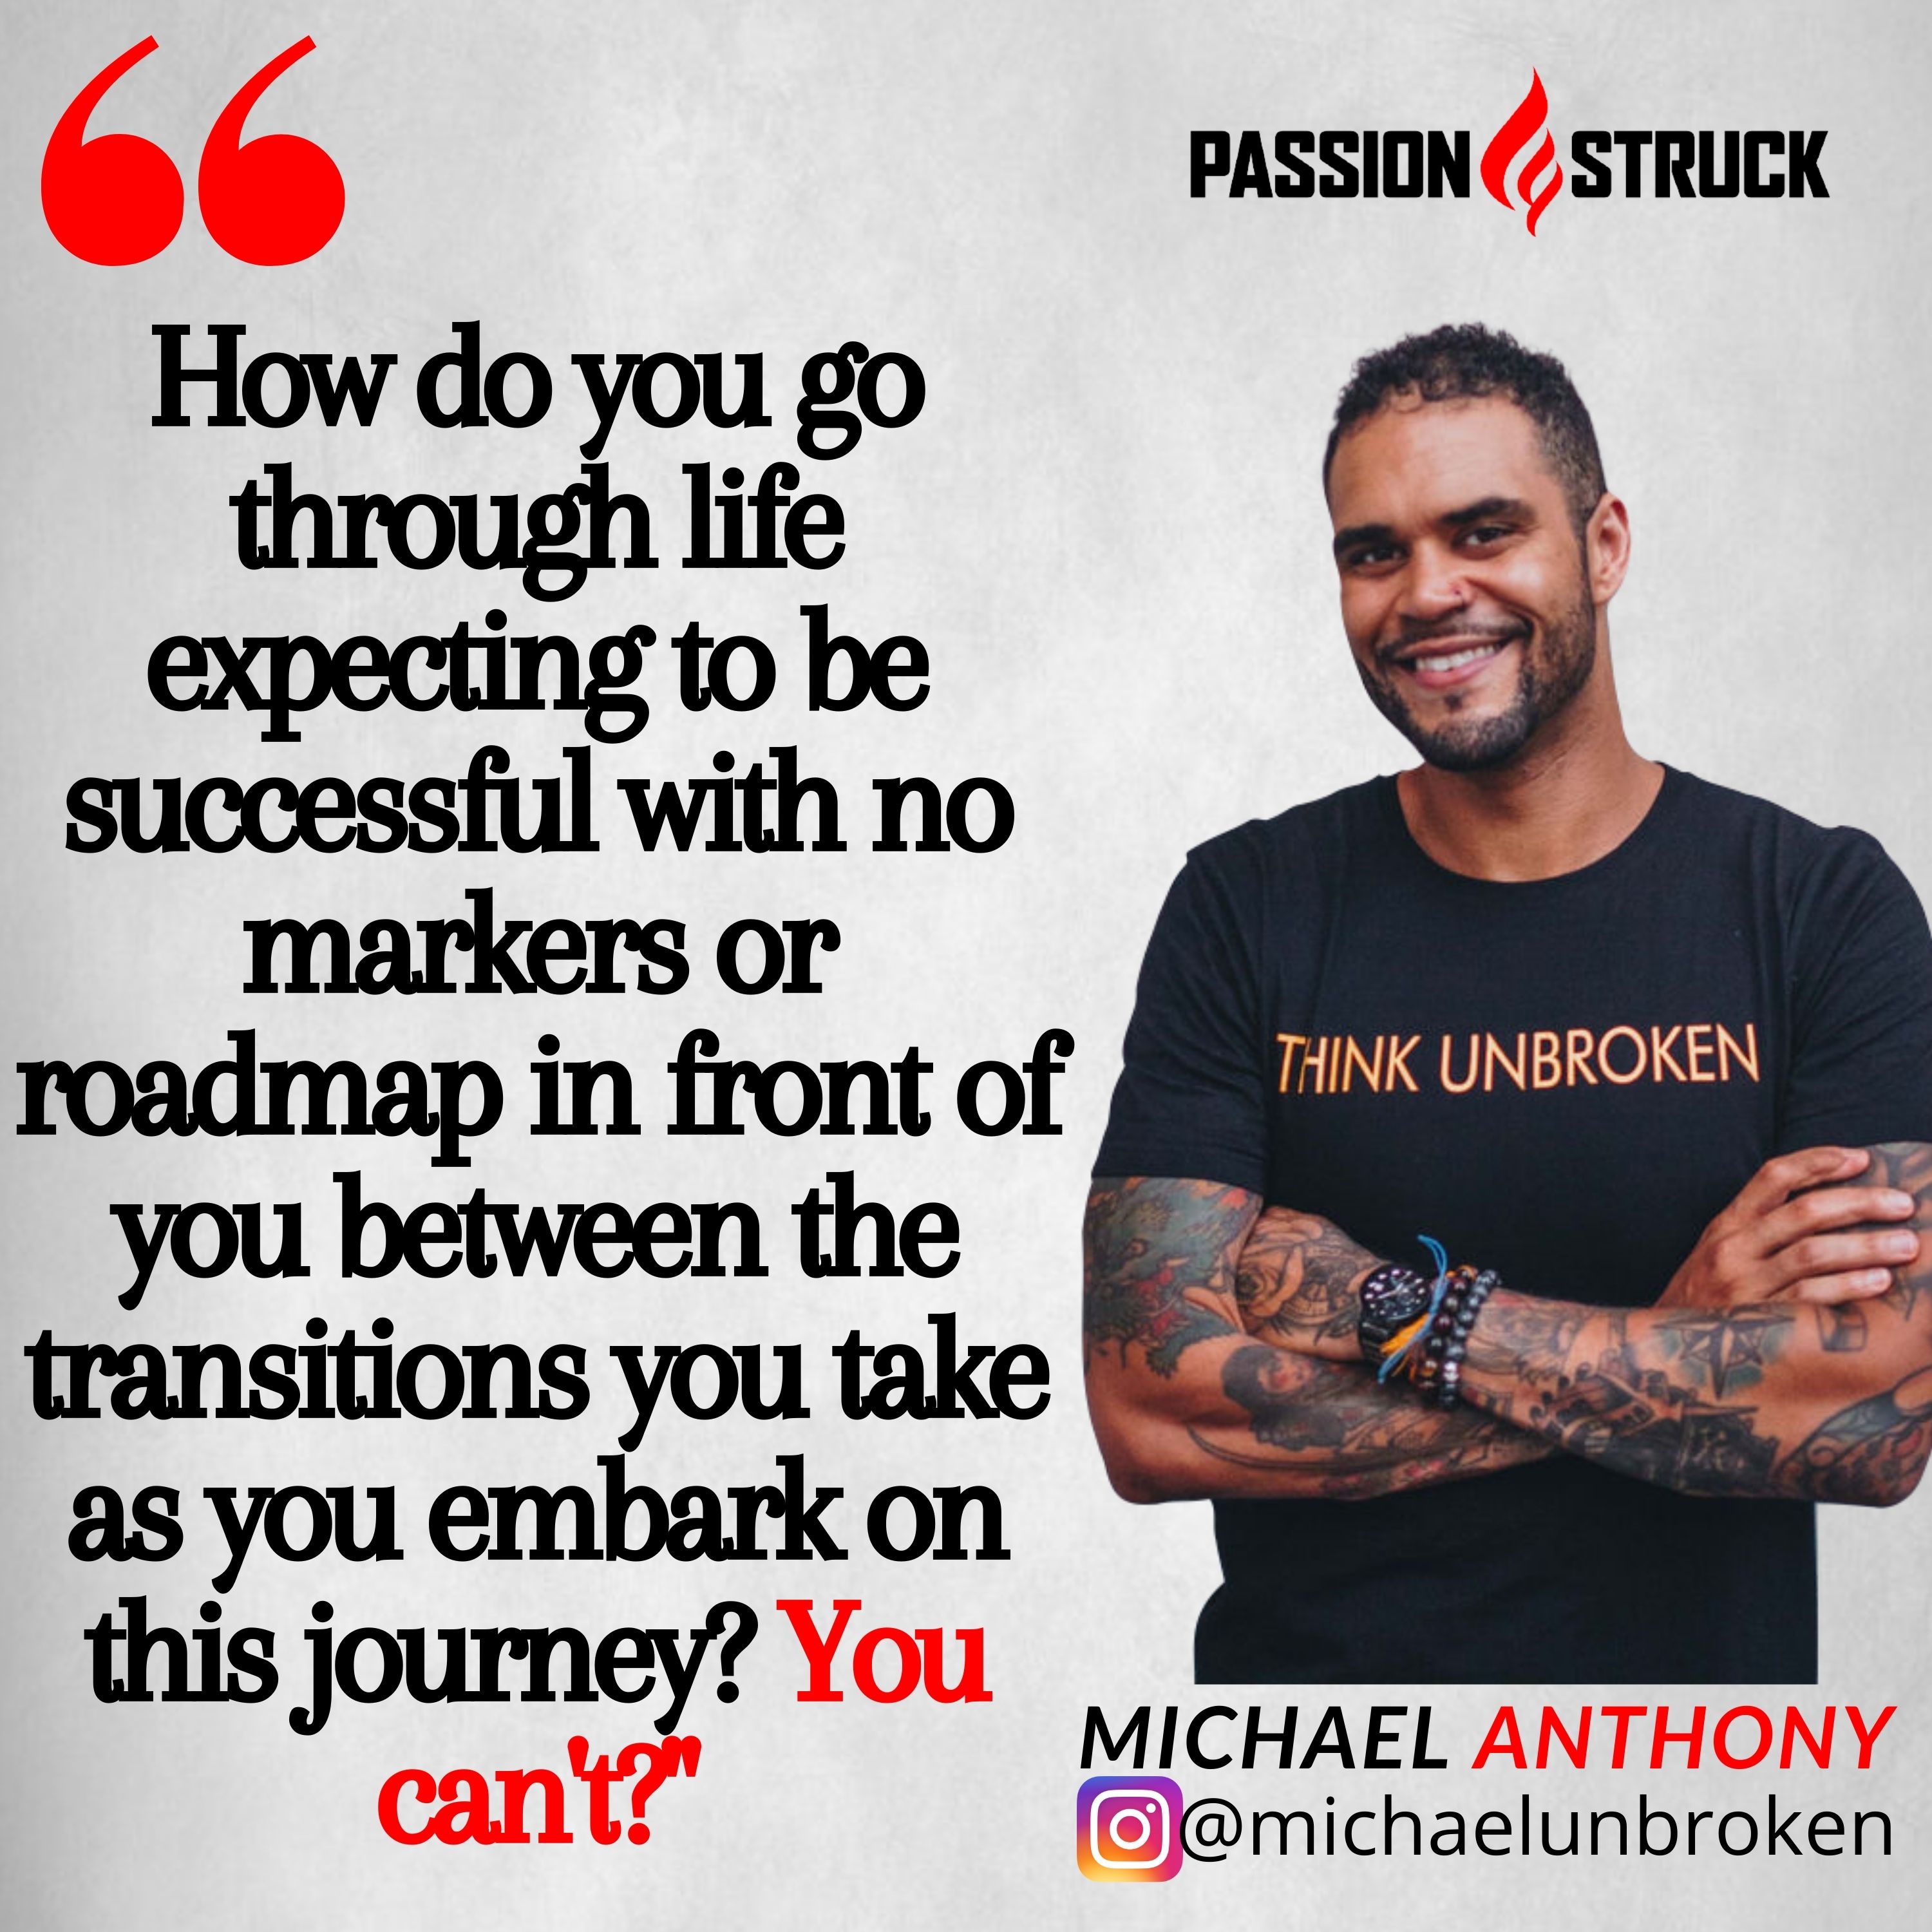 Michael Anthony quote about taking daily actions to improve your life